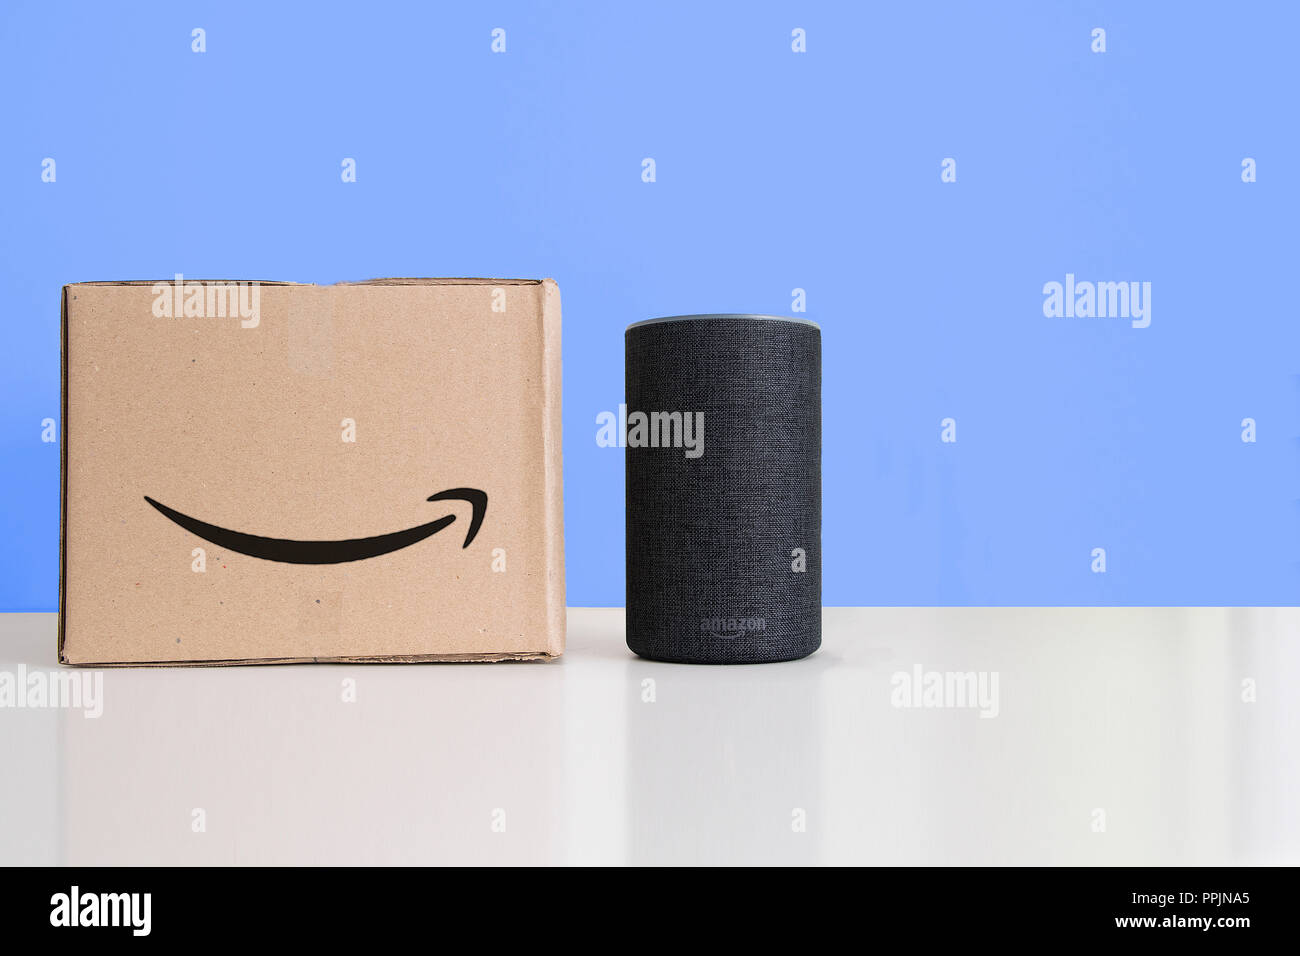 BARCELONA - SEPTEMBER 2018: Amazon Echo Smart Home Alexa Voice Service next to an order in a cardboard box in a living room on September 26, 2018 in B Stock Photo